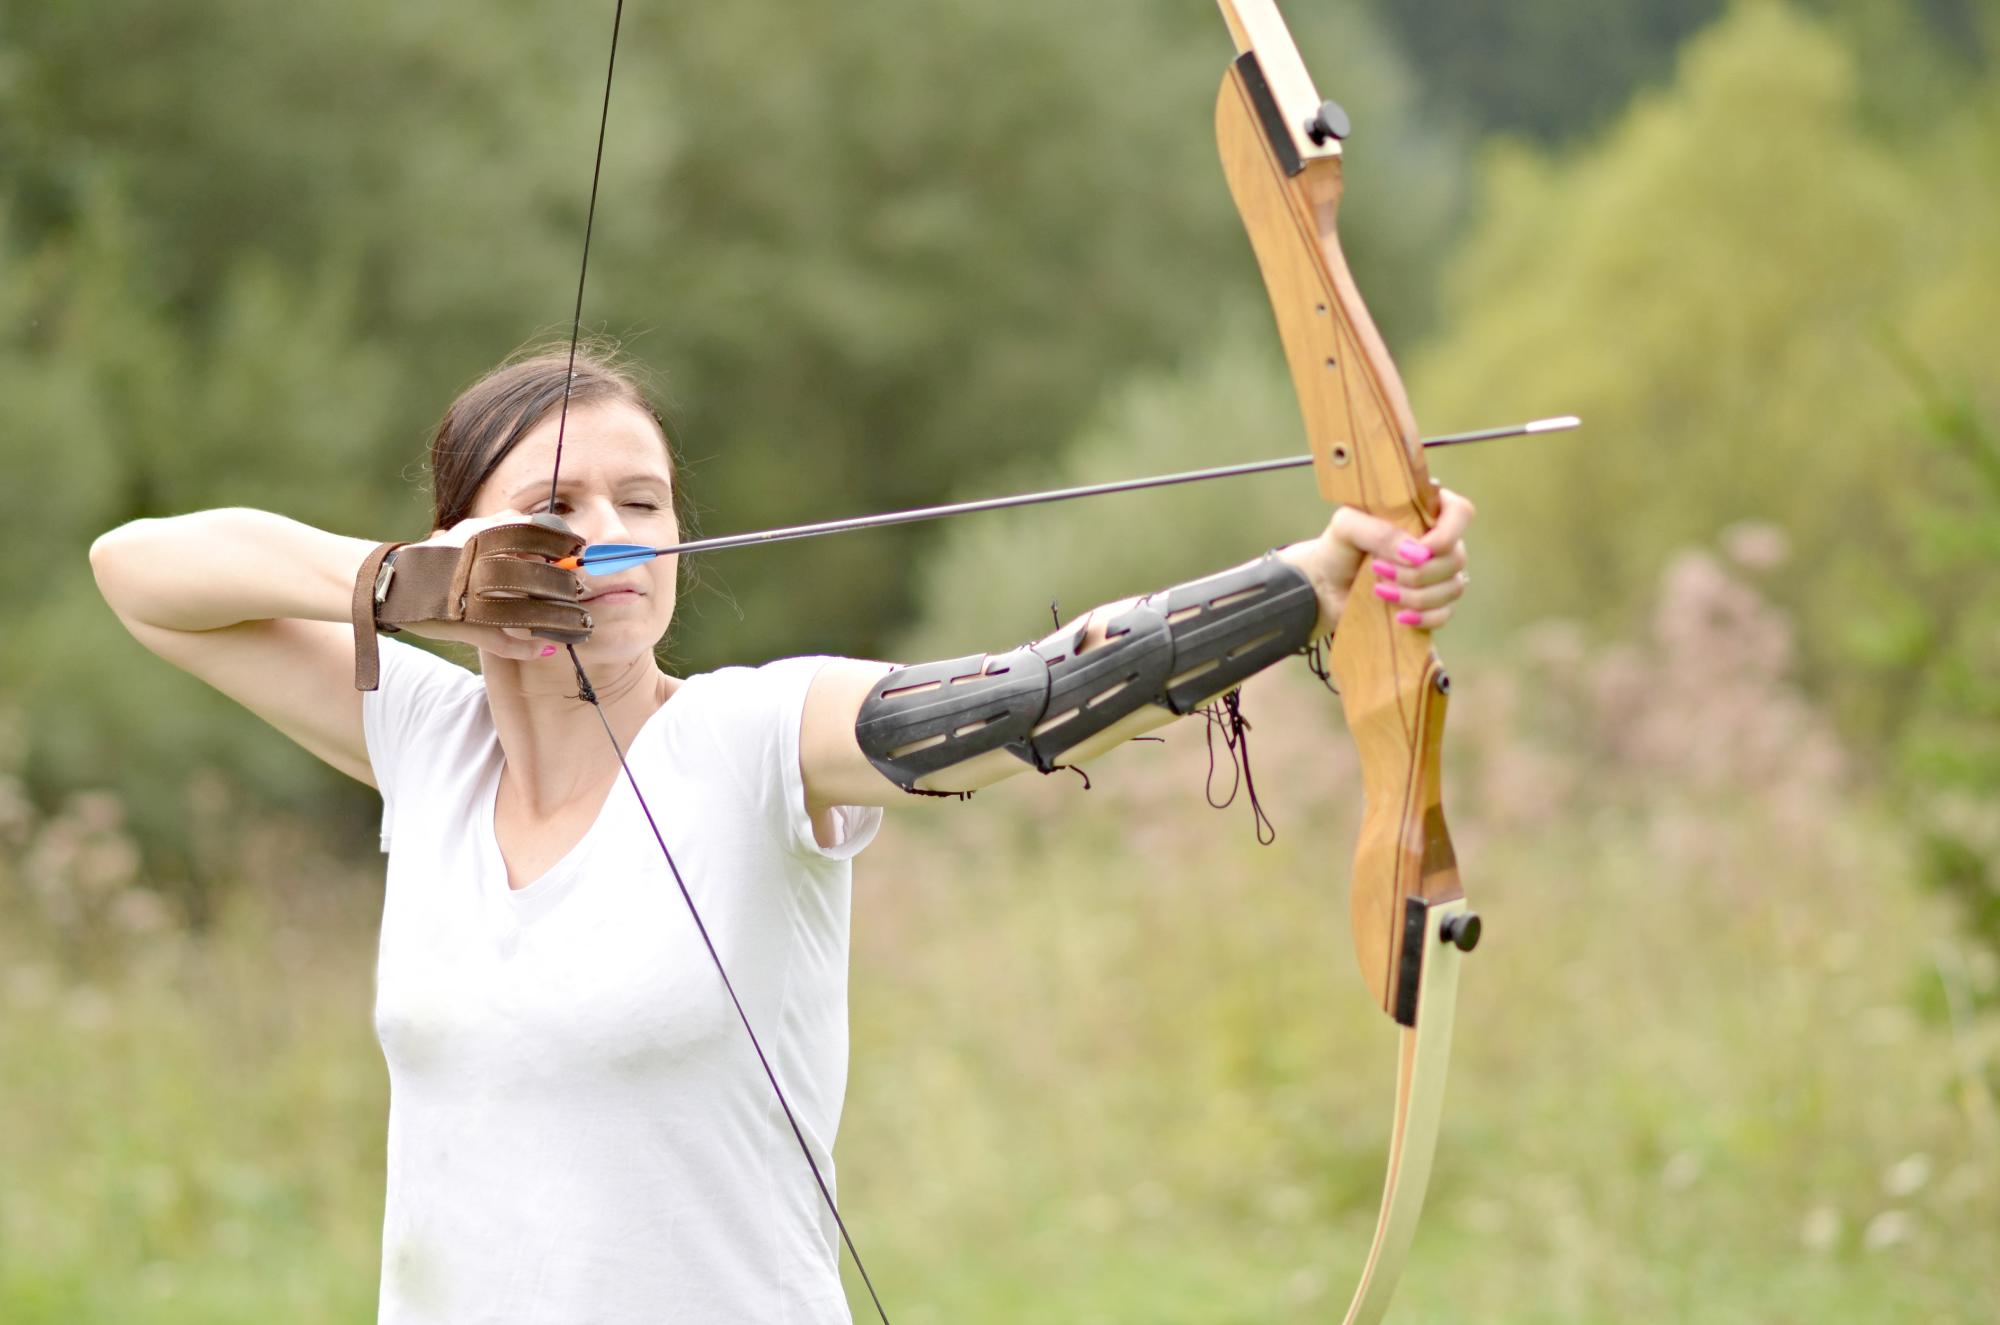 A women holding a bow, pulling back the string about to release and arrow. She is wearing the appropriate safety gear. Shutterstock.